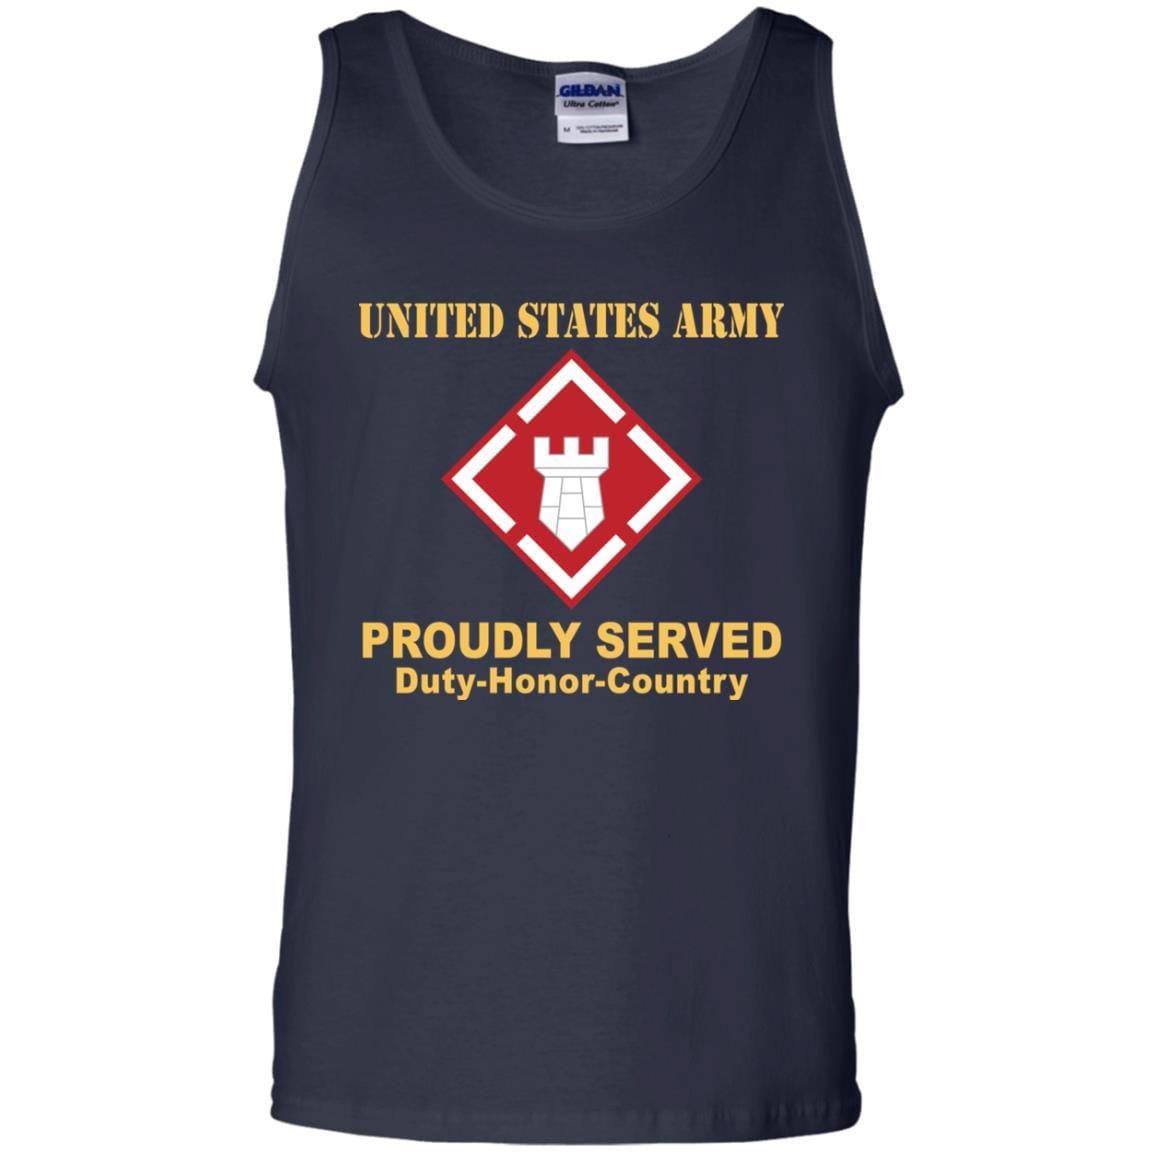 US ARMY 20TH ENGINEER BRIGADE WITH AIRBORNE TAB- Proudly Served T-Shirt On Front For Men-TShirt-Army-Veterans Nation